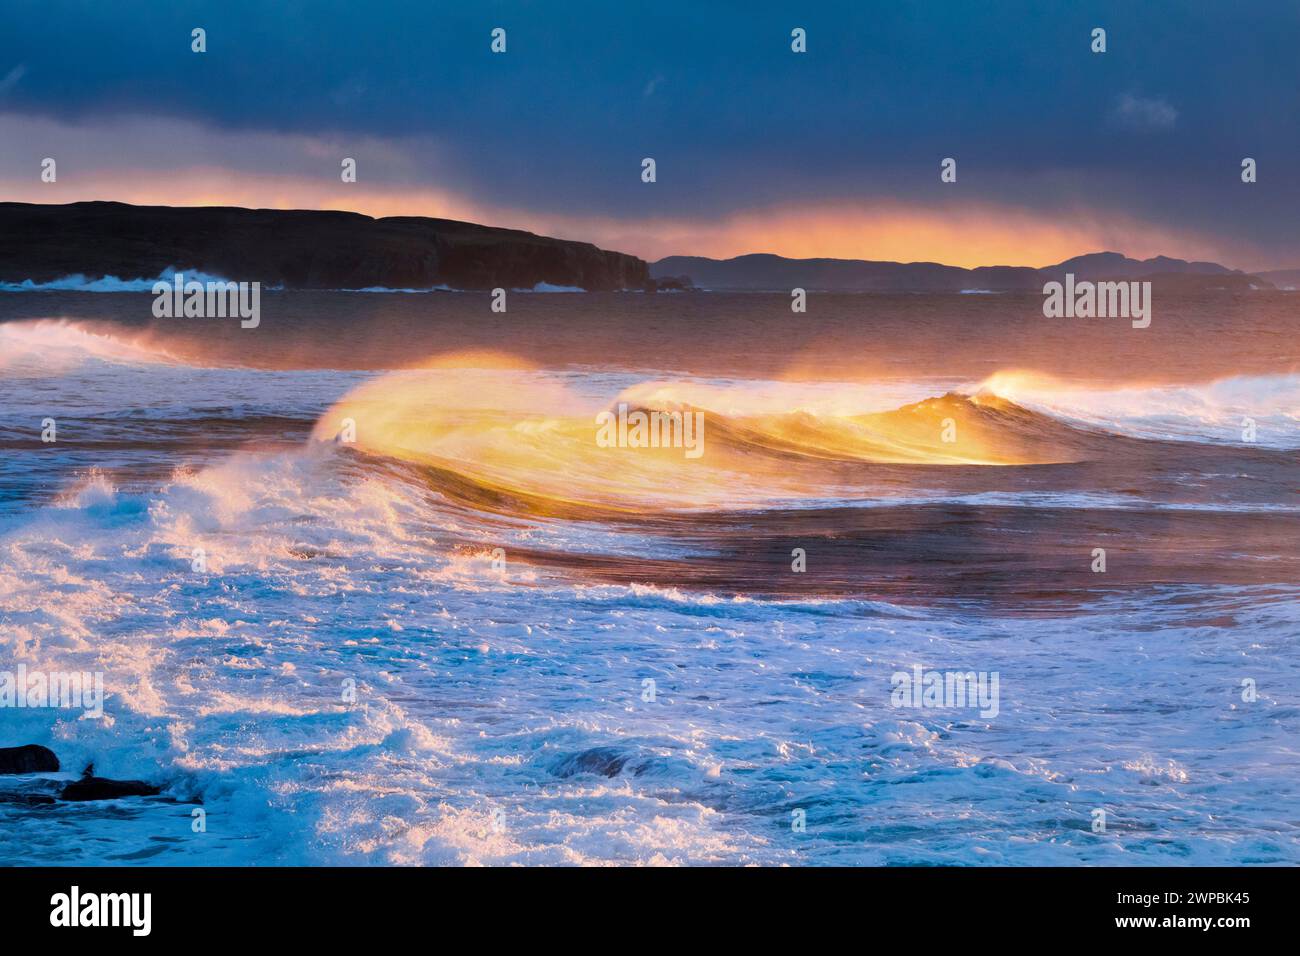 Big waves breaking in a winter storm, swirling spray illuminated by the warm light of the evening sun, Summer Isles in the background, United Kingdom, Stock Photo